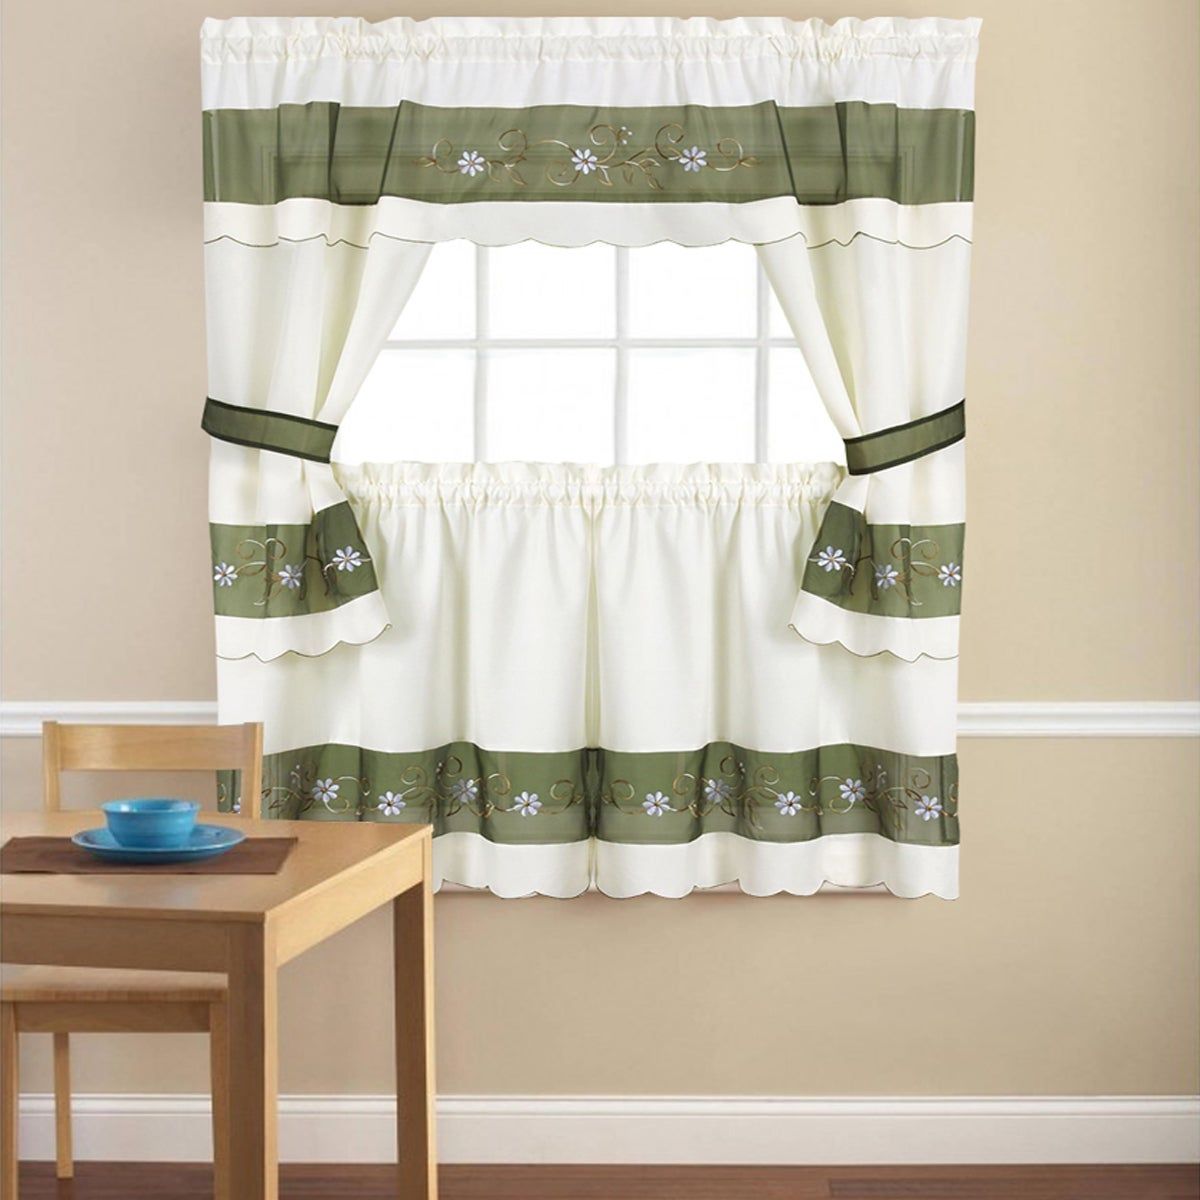 Embroidered Floral 5 Piece Kitchen Curtain Set Throughout Urban Embroidered Tier And Valance Kitchen Curtain Tier Sets (Photo 12 of 20)